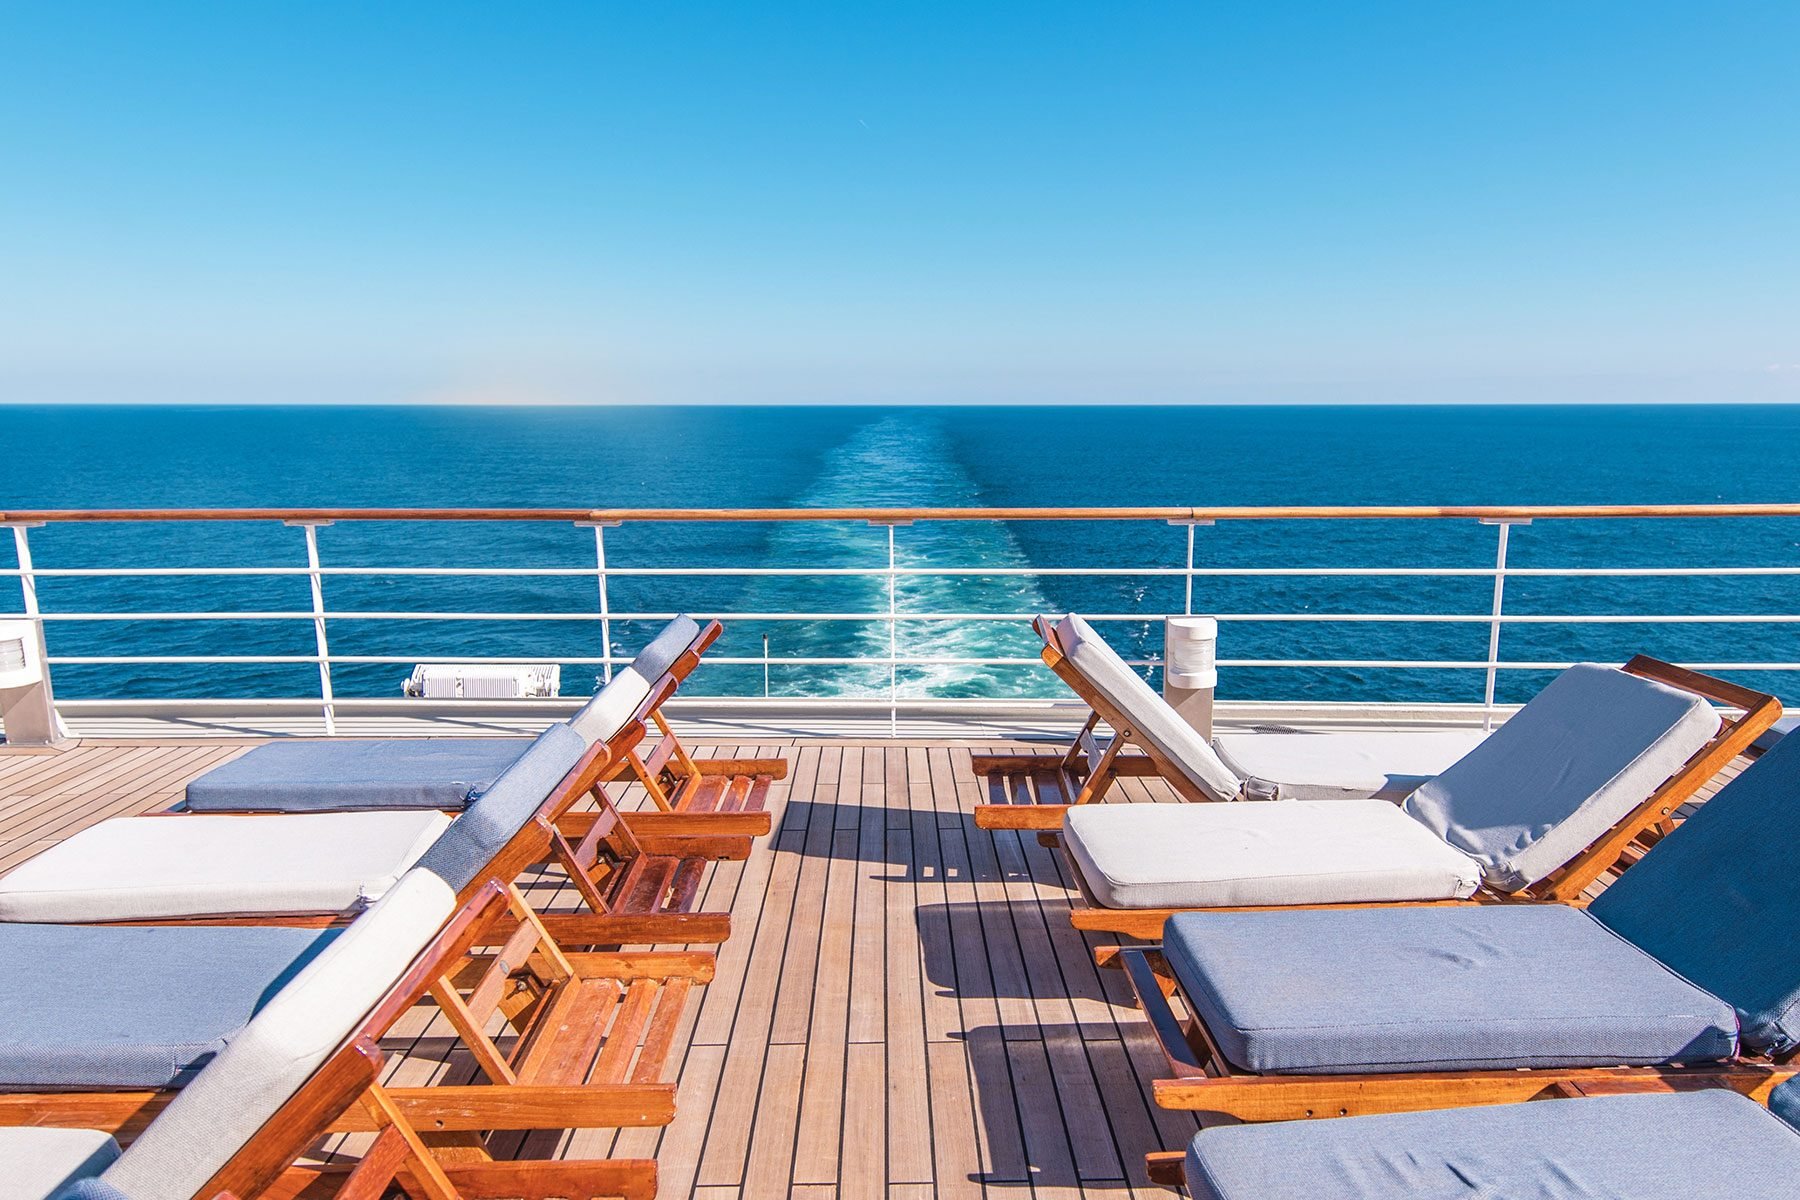 Keeping cruise retail vibrant, fun and relevant: One on One with